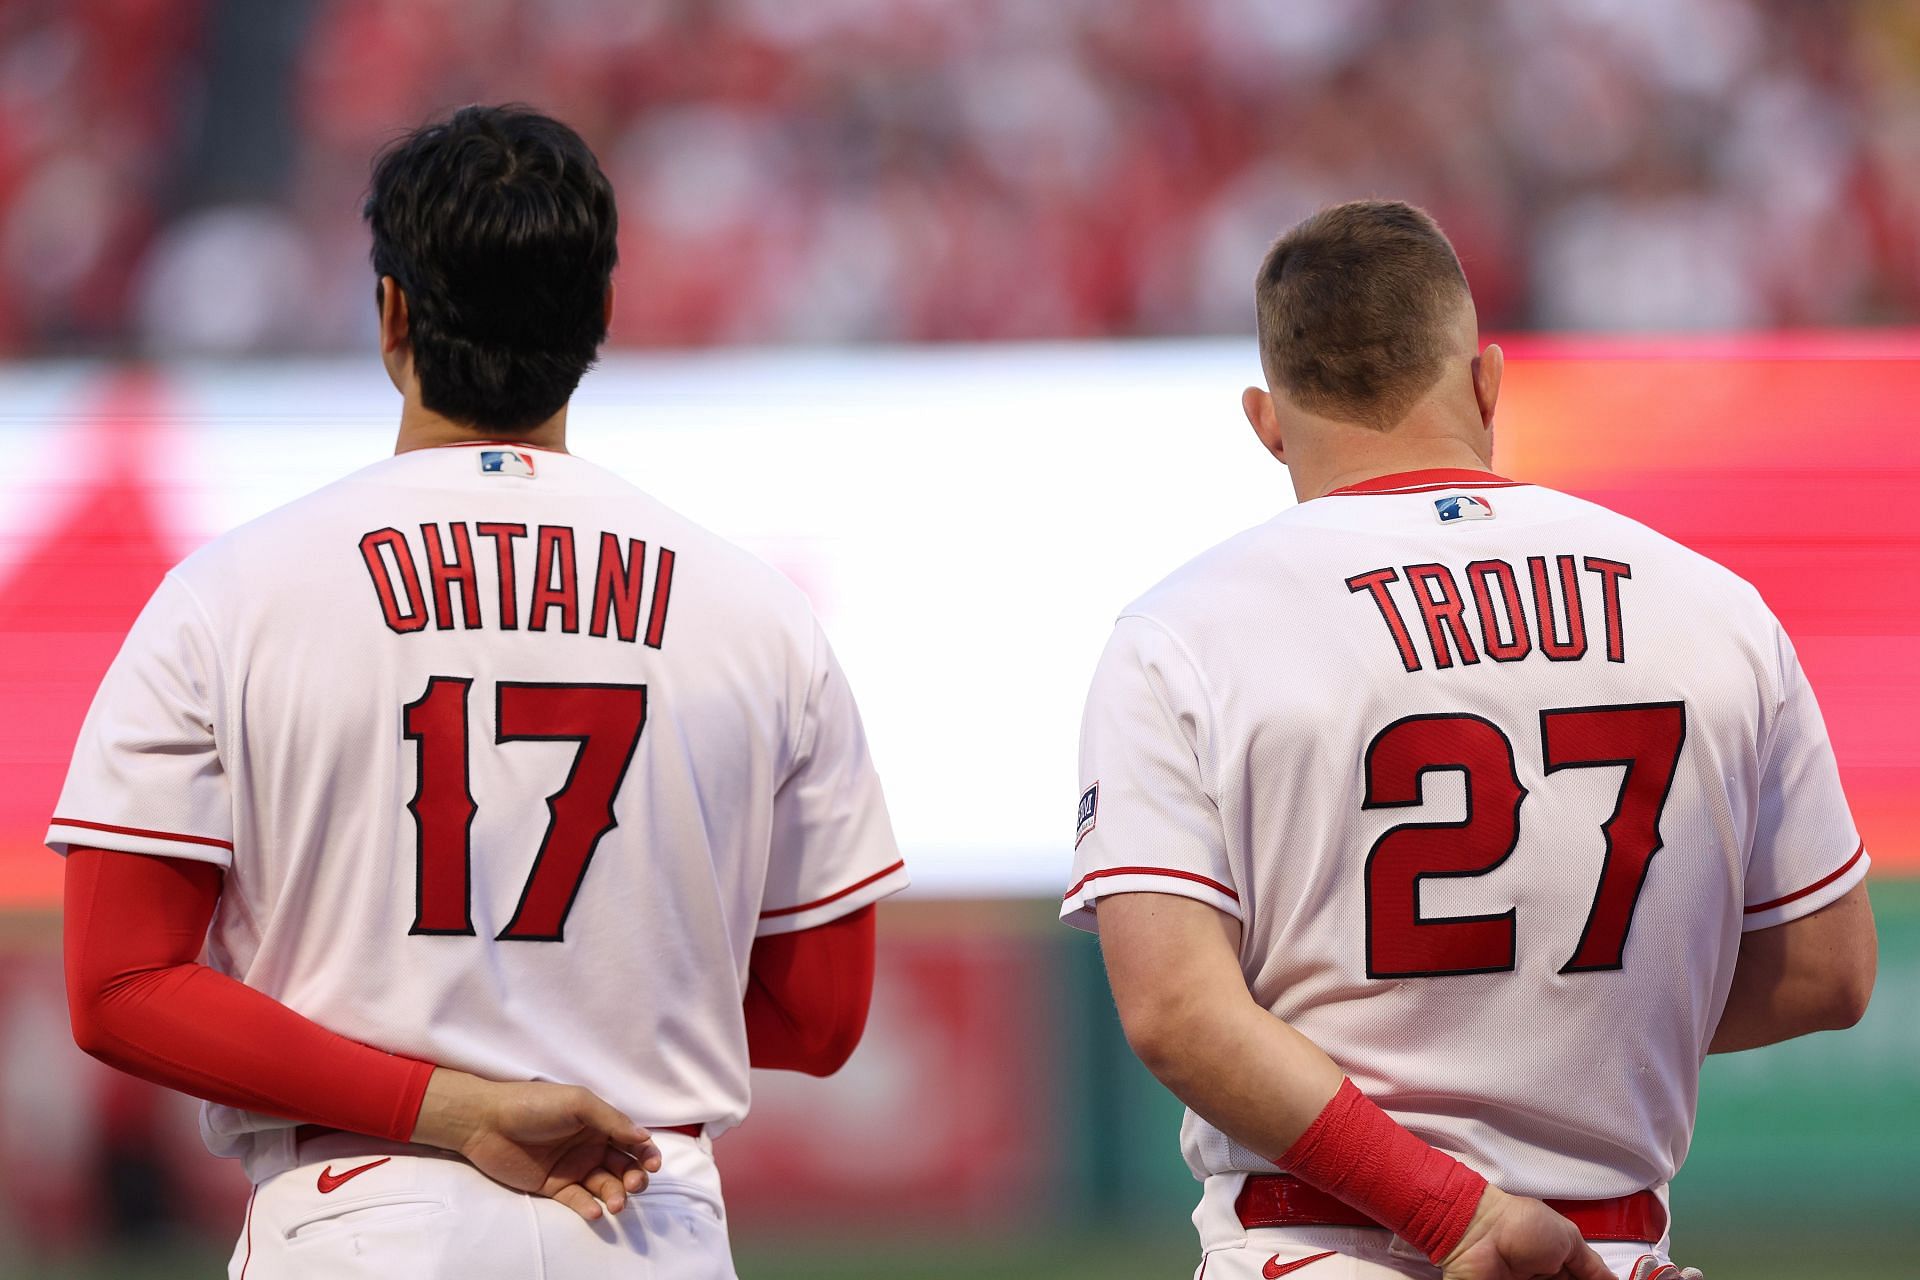 Shohei Ohtani and Mike Trout line up for the National Anthem at Angel Stadium in Anaheim